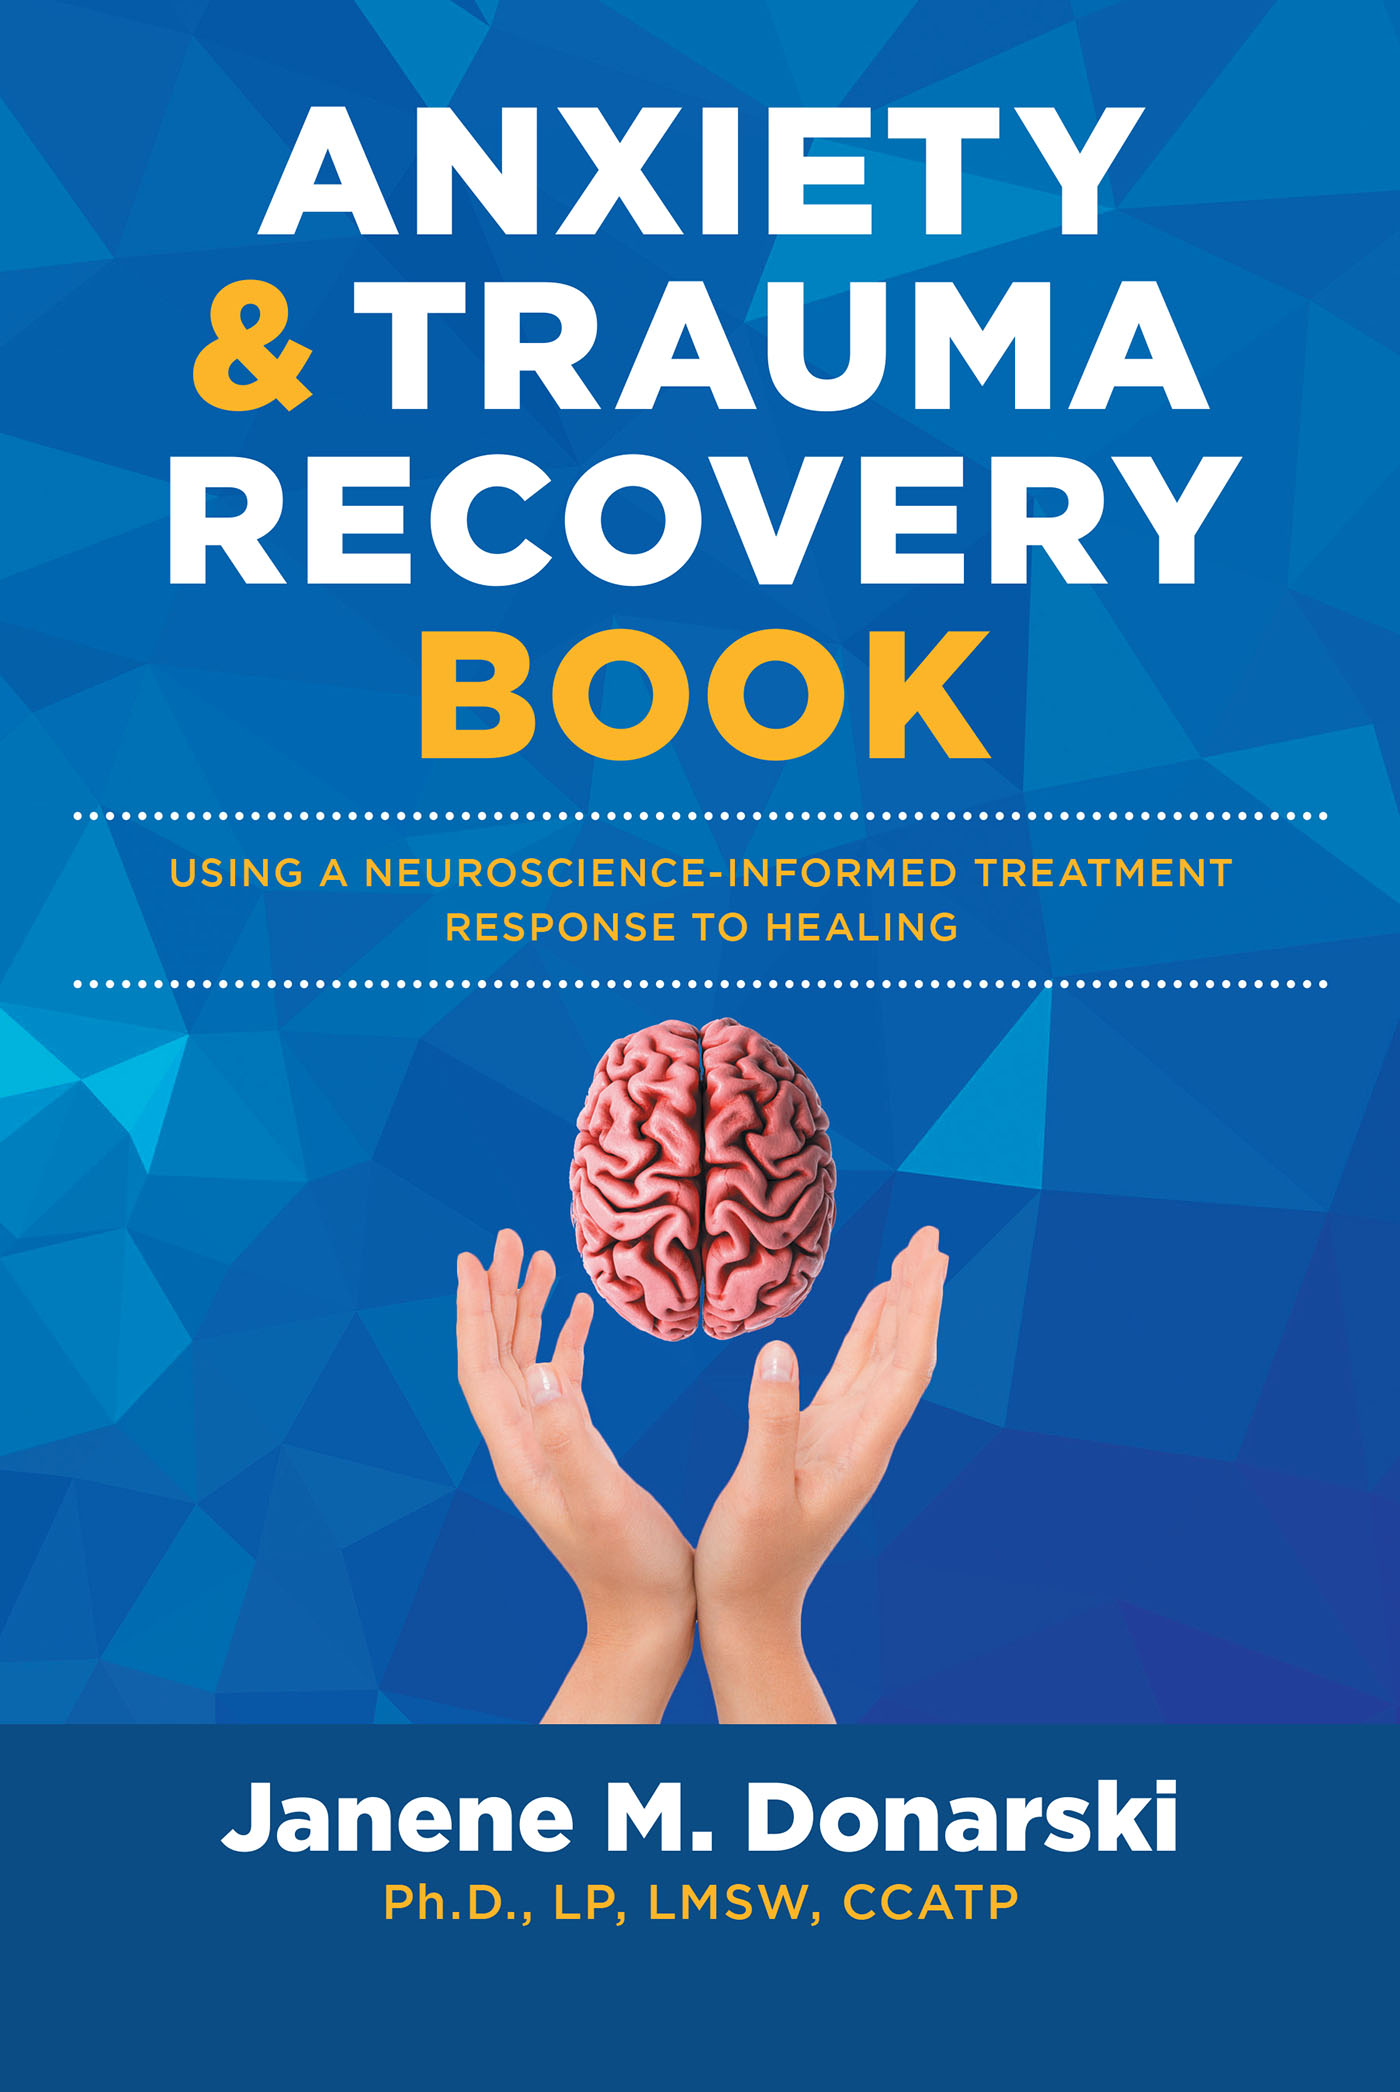 Author Janene M. Donarski’s New Book, "Anxiety and Trauma Recovery," is a Guide for Overcoming Anxiety and Trauma, Written for Those Struggling with Mental Health